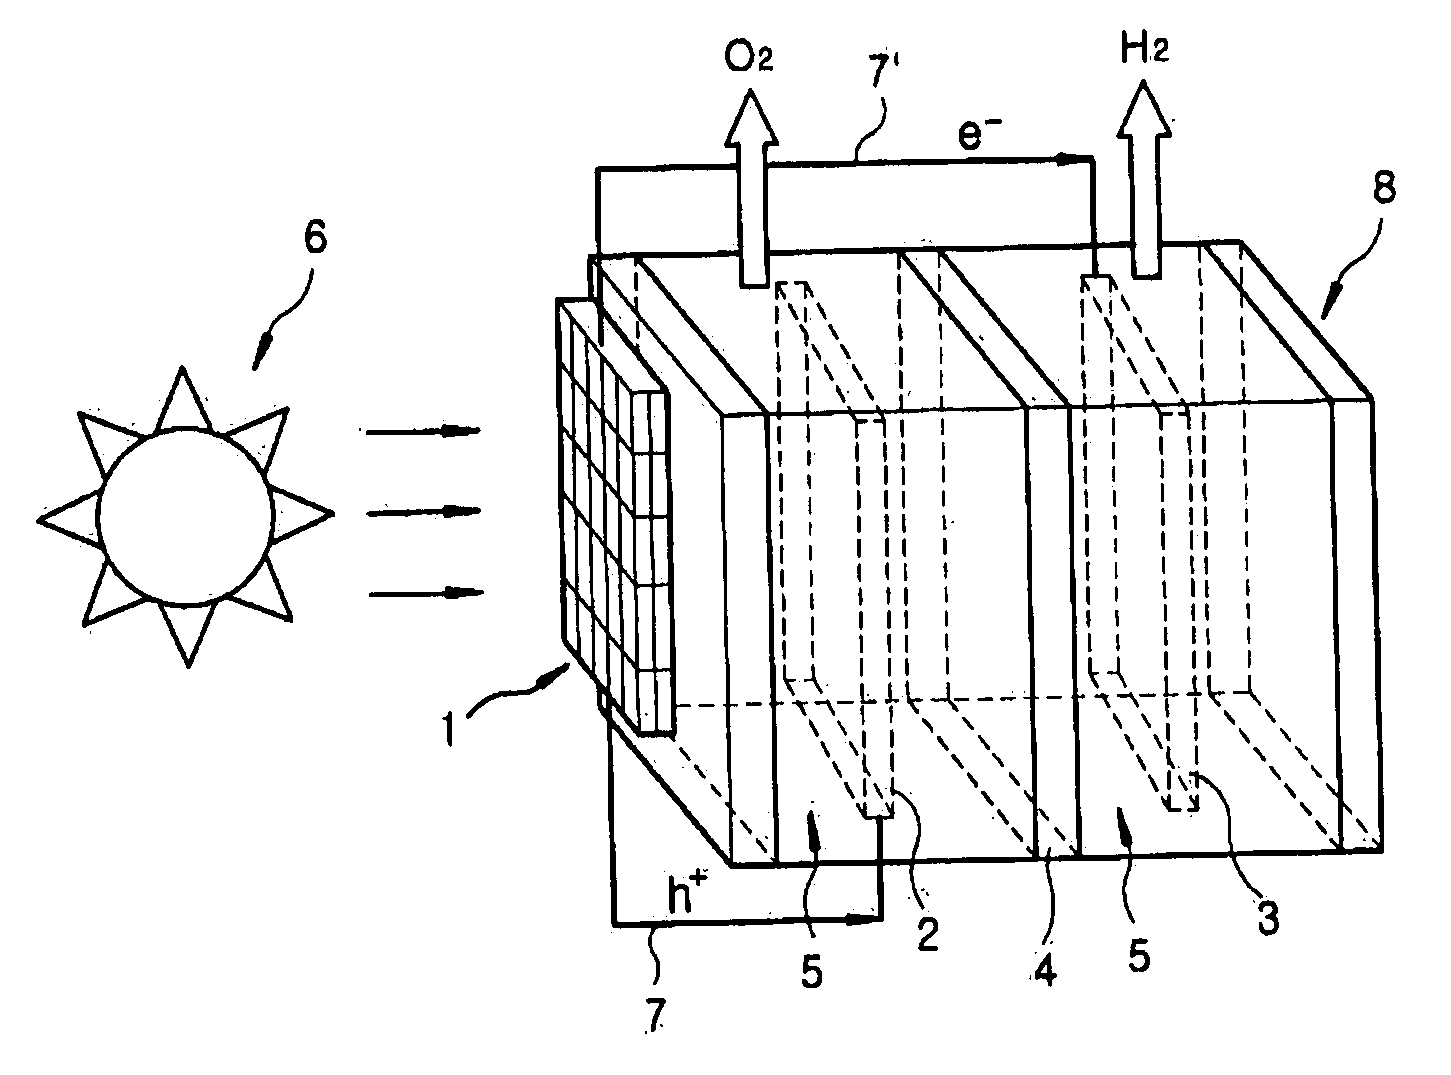 Photoelectrochemical system for hydrogen production from water